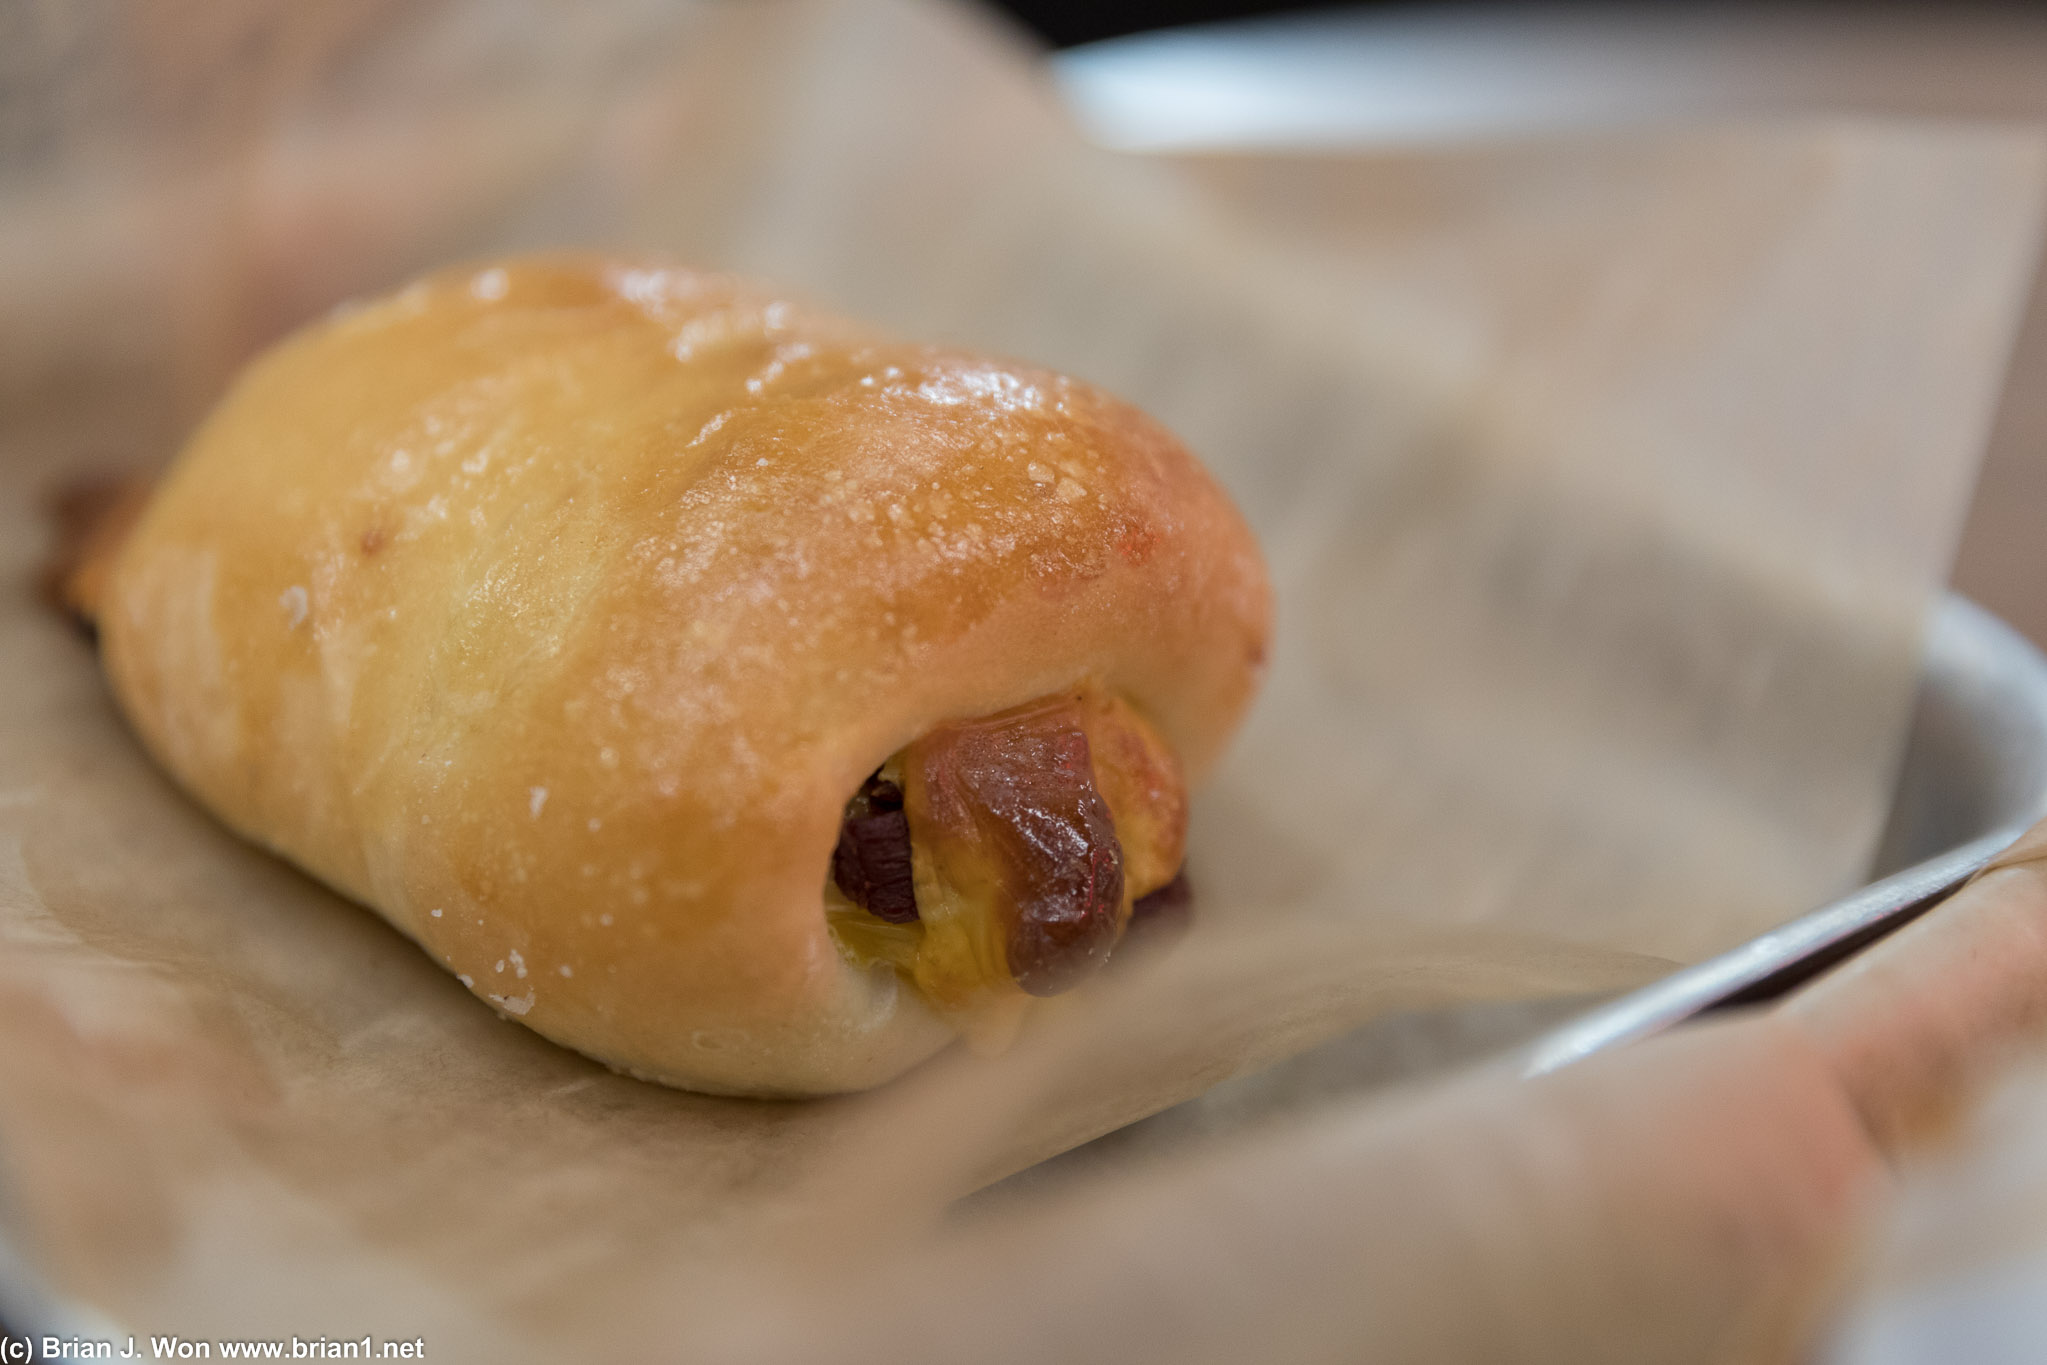 Bacon and egg kolache. Not as pretty as the donut, but t'was even better.